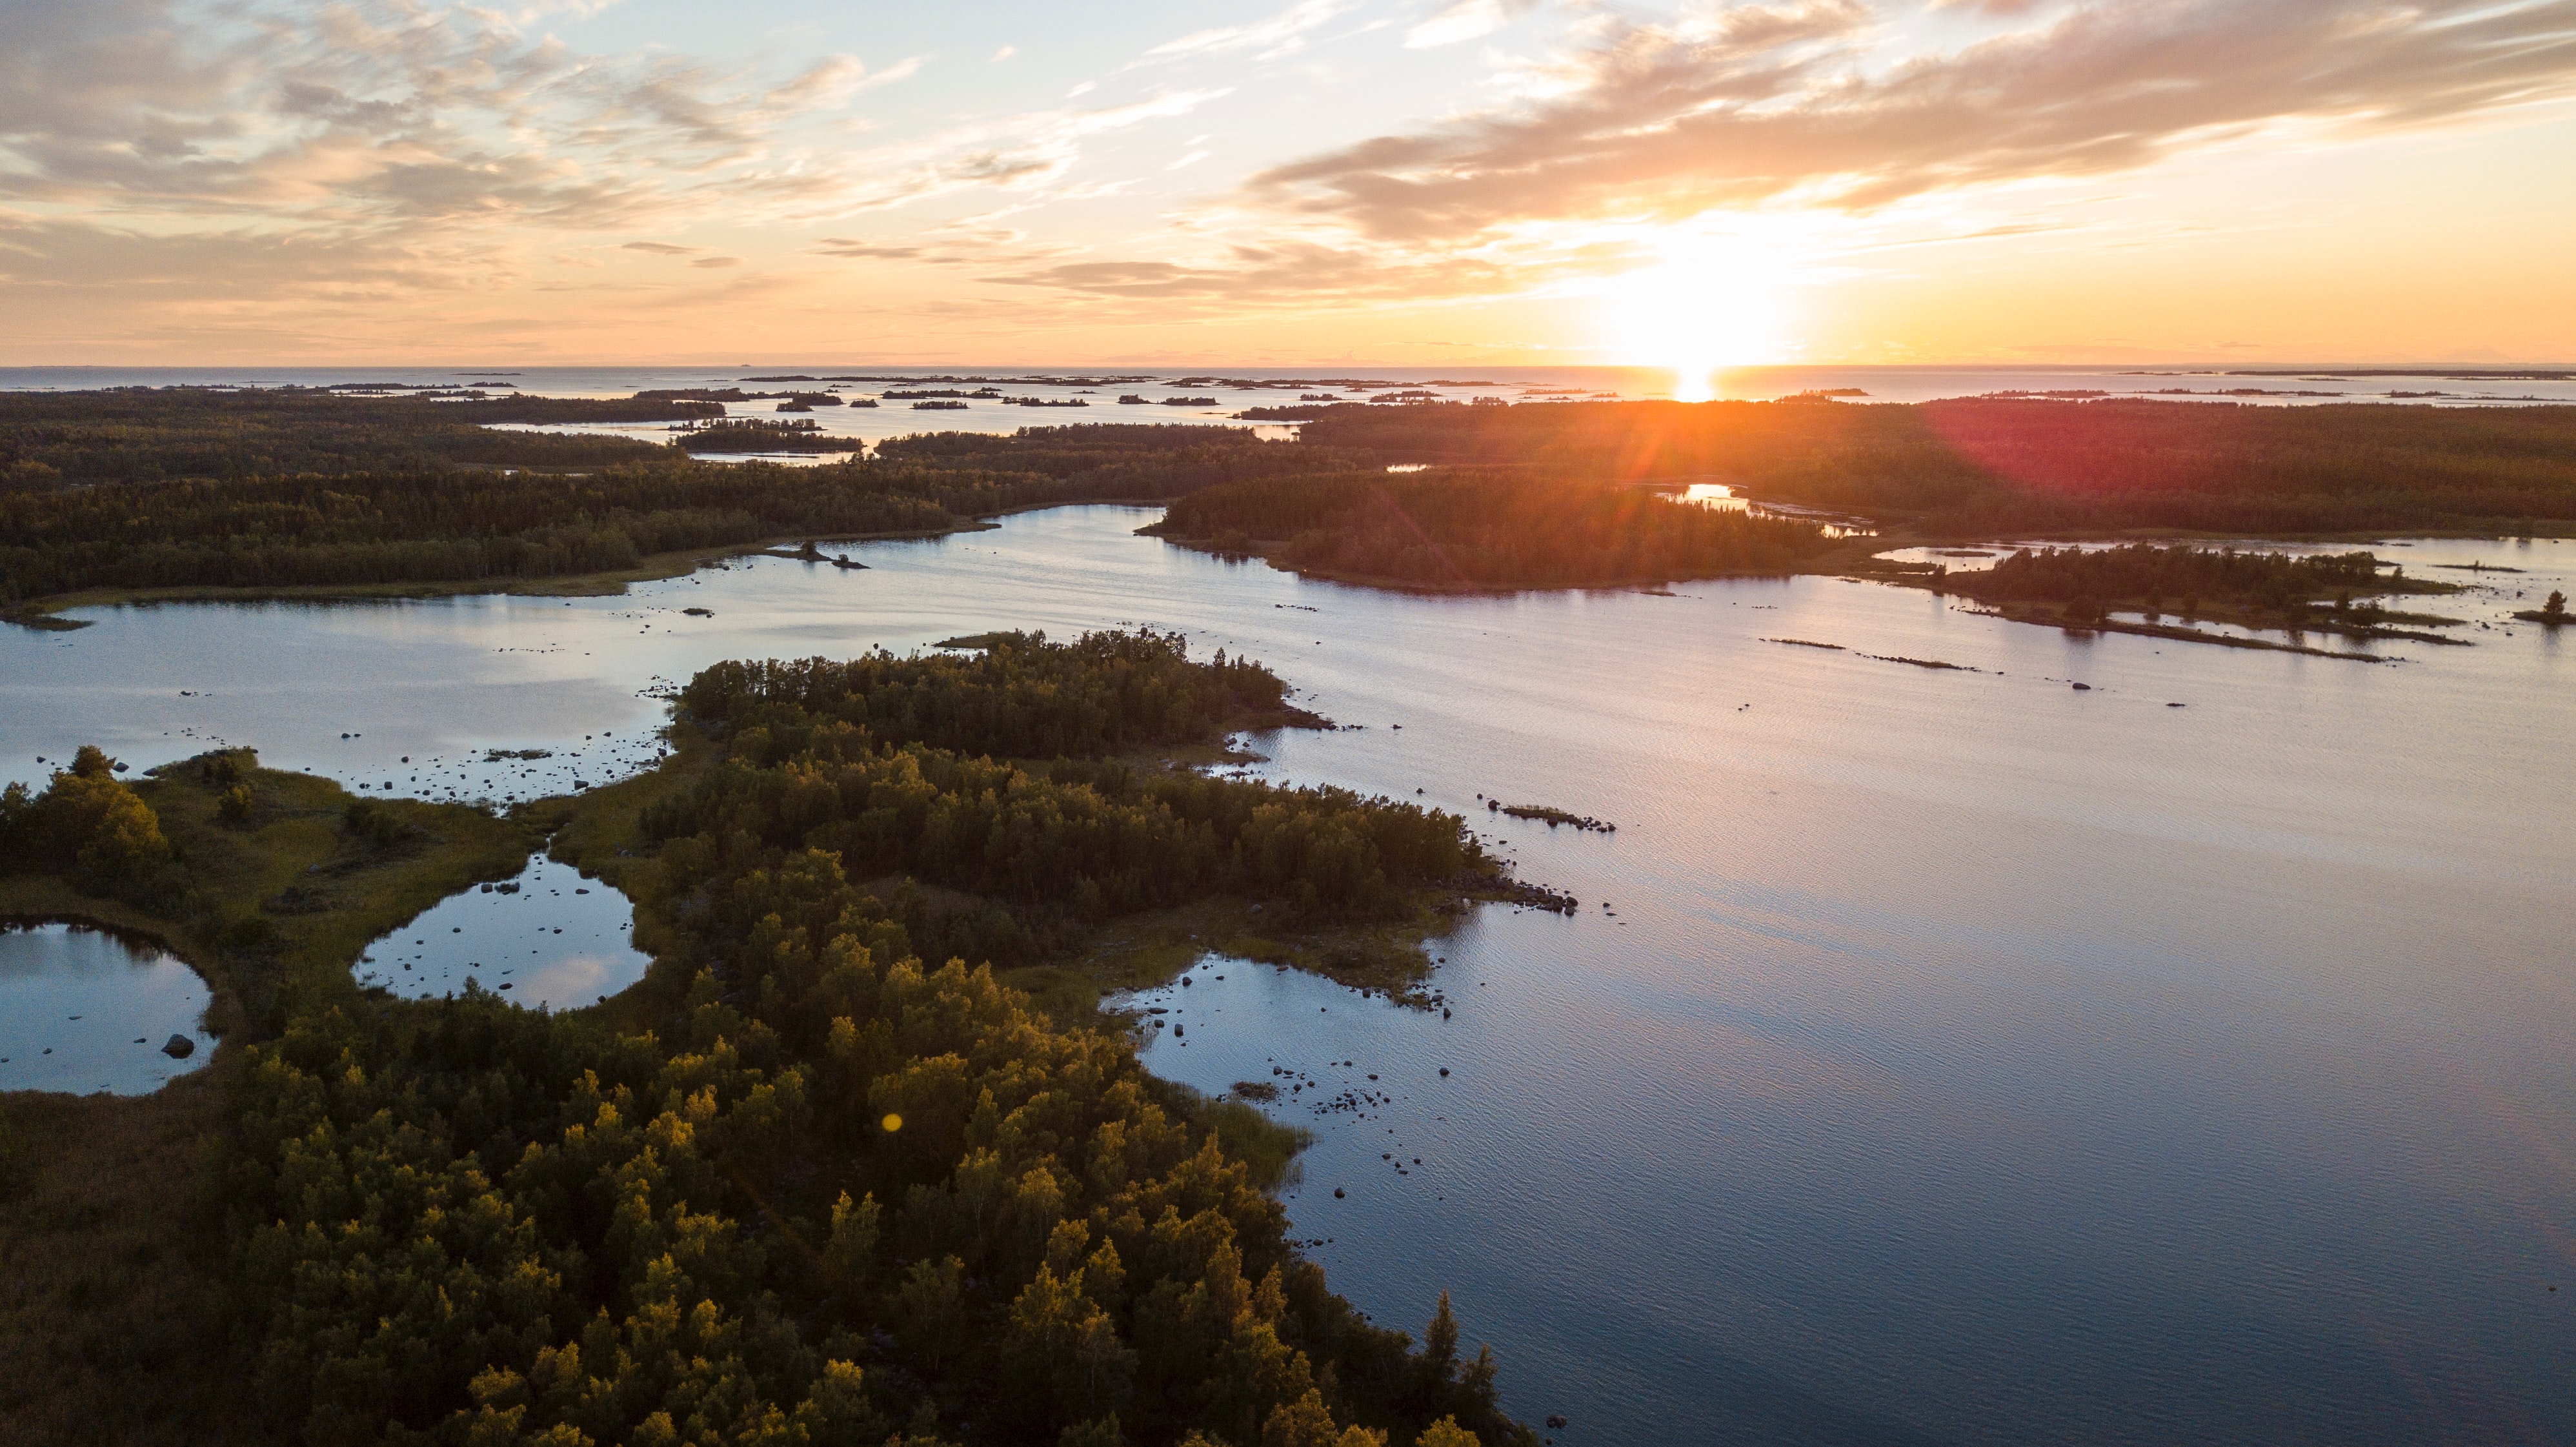 The Finnish archipelago during the sunset.